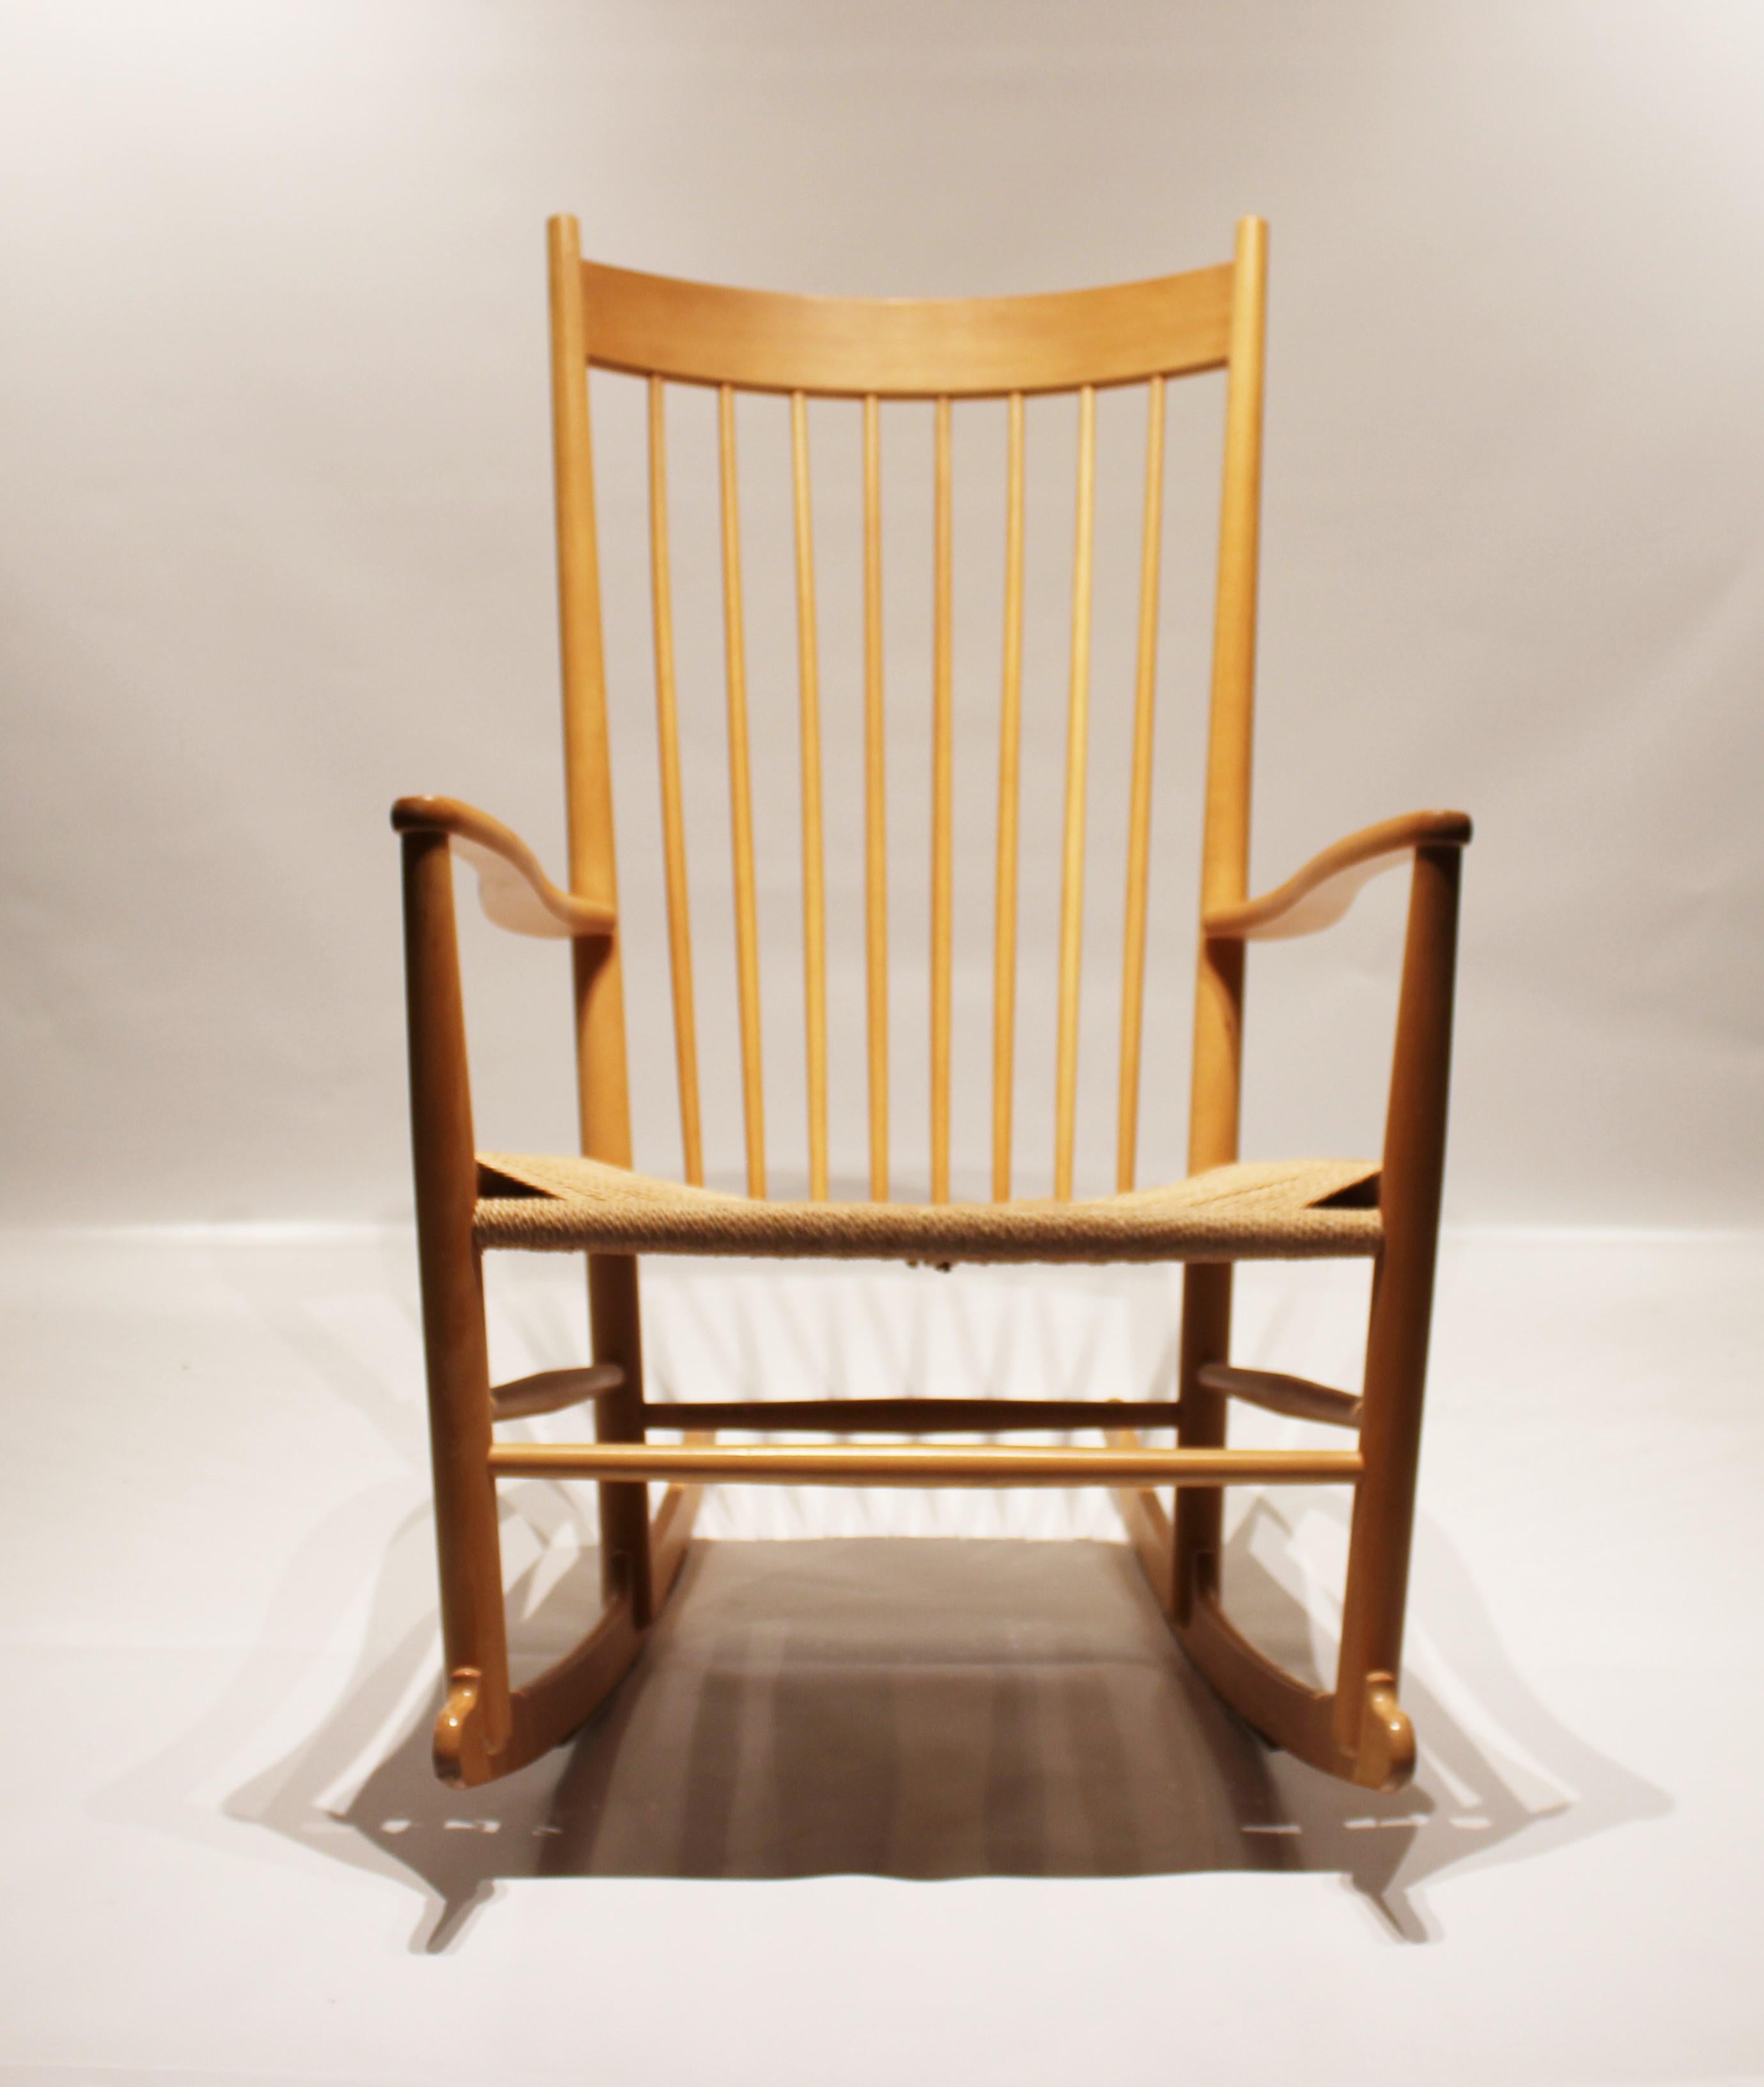 Rocking chair, model J16, of beech and seat of paper cord designed by Hans J. Wegner in 1944 and manufactured by Fredericia Furniture in the 1960s. The chair is in great vintage condition.